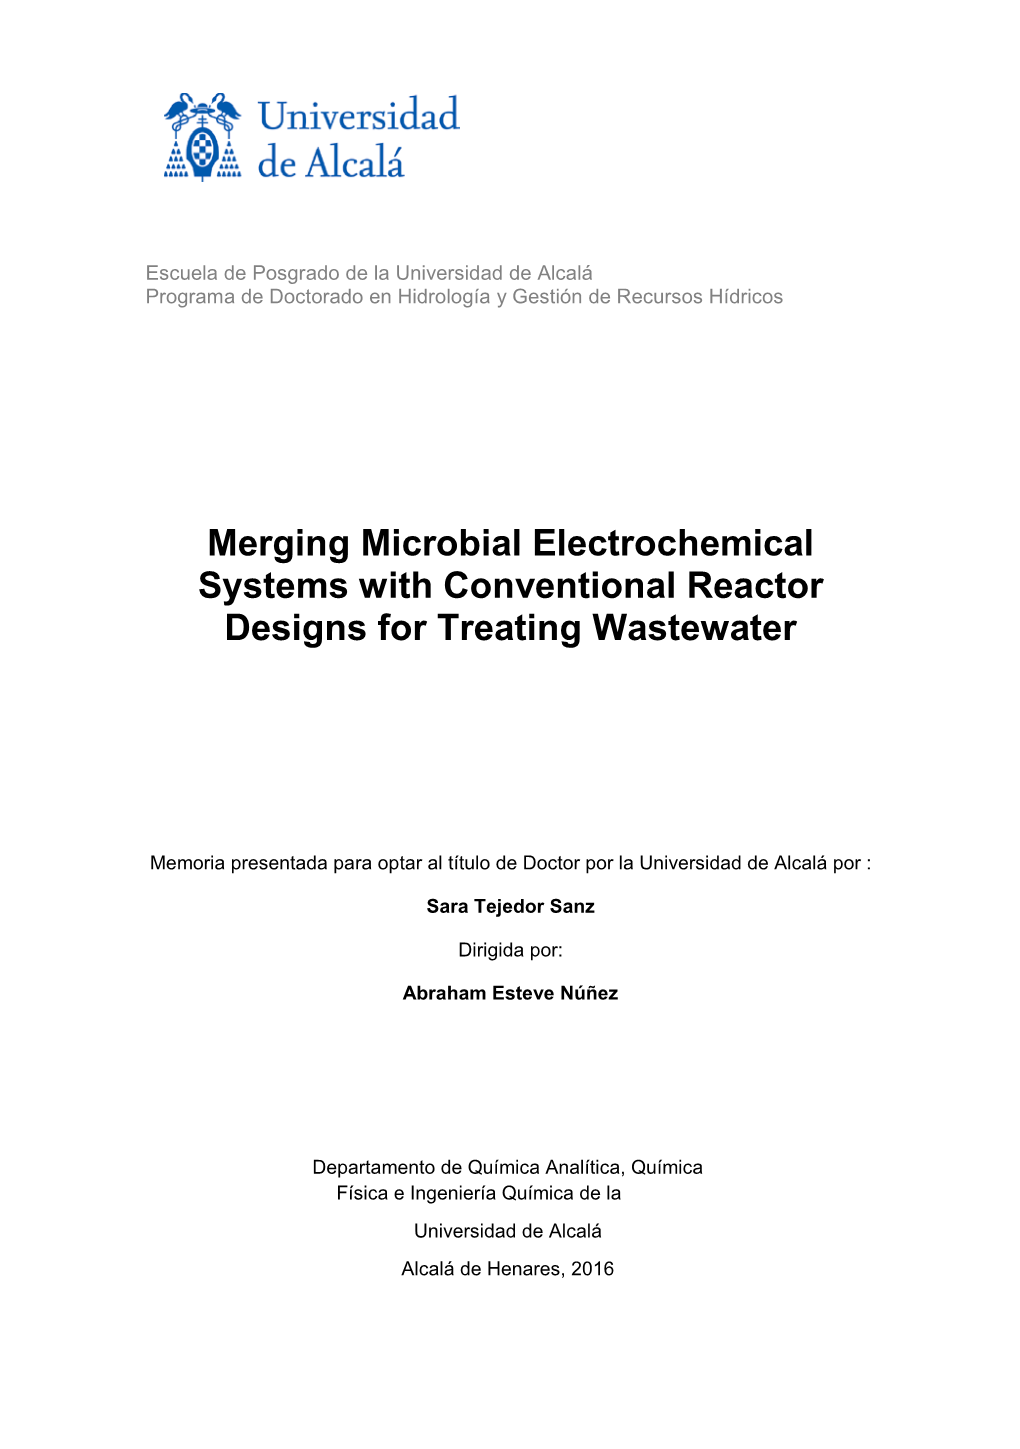 Merging Microbial Electrochemical Systems with Conventional Reactor Designs for Treating Wastewater